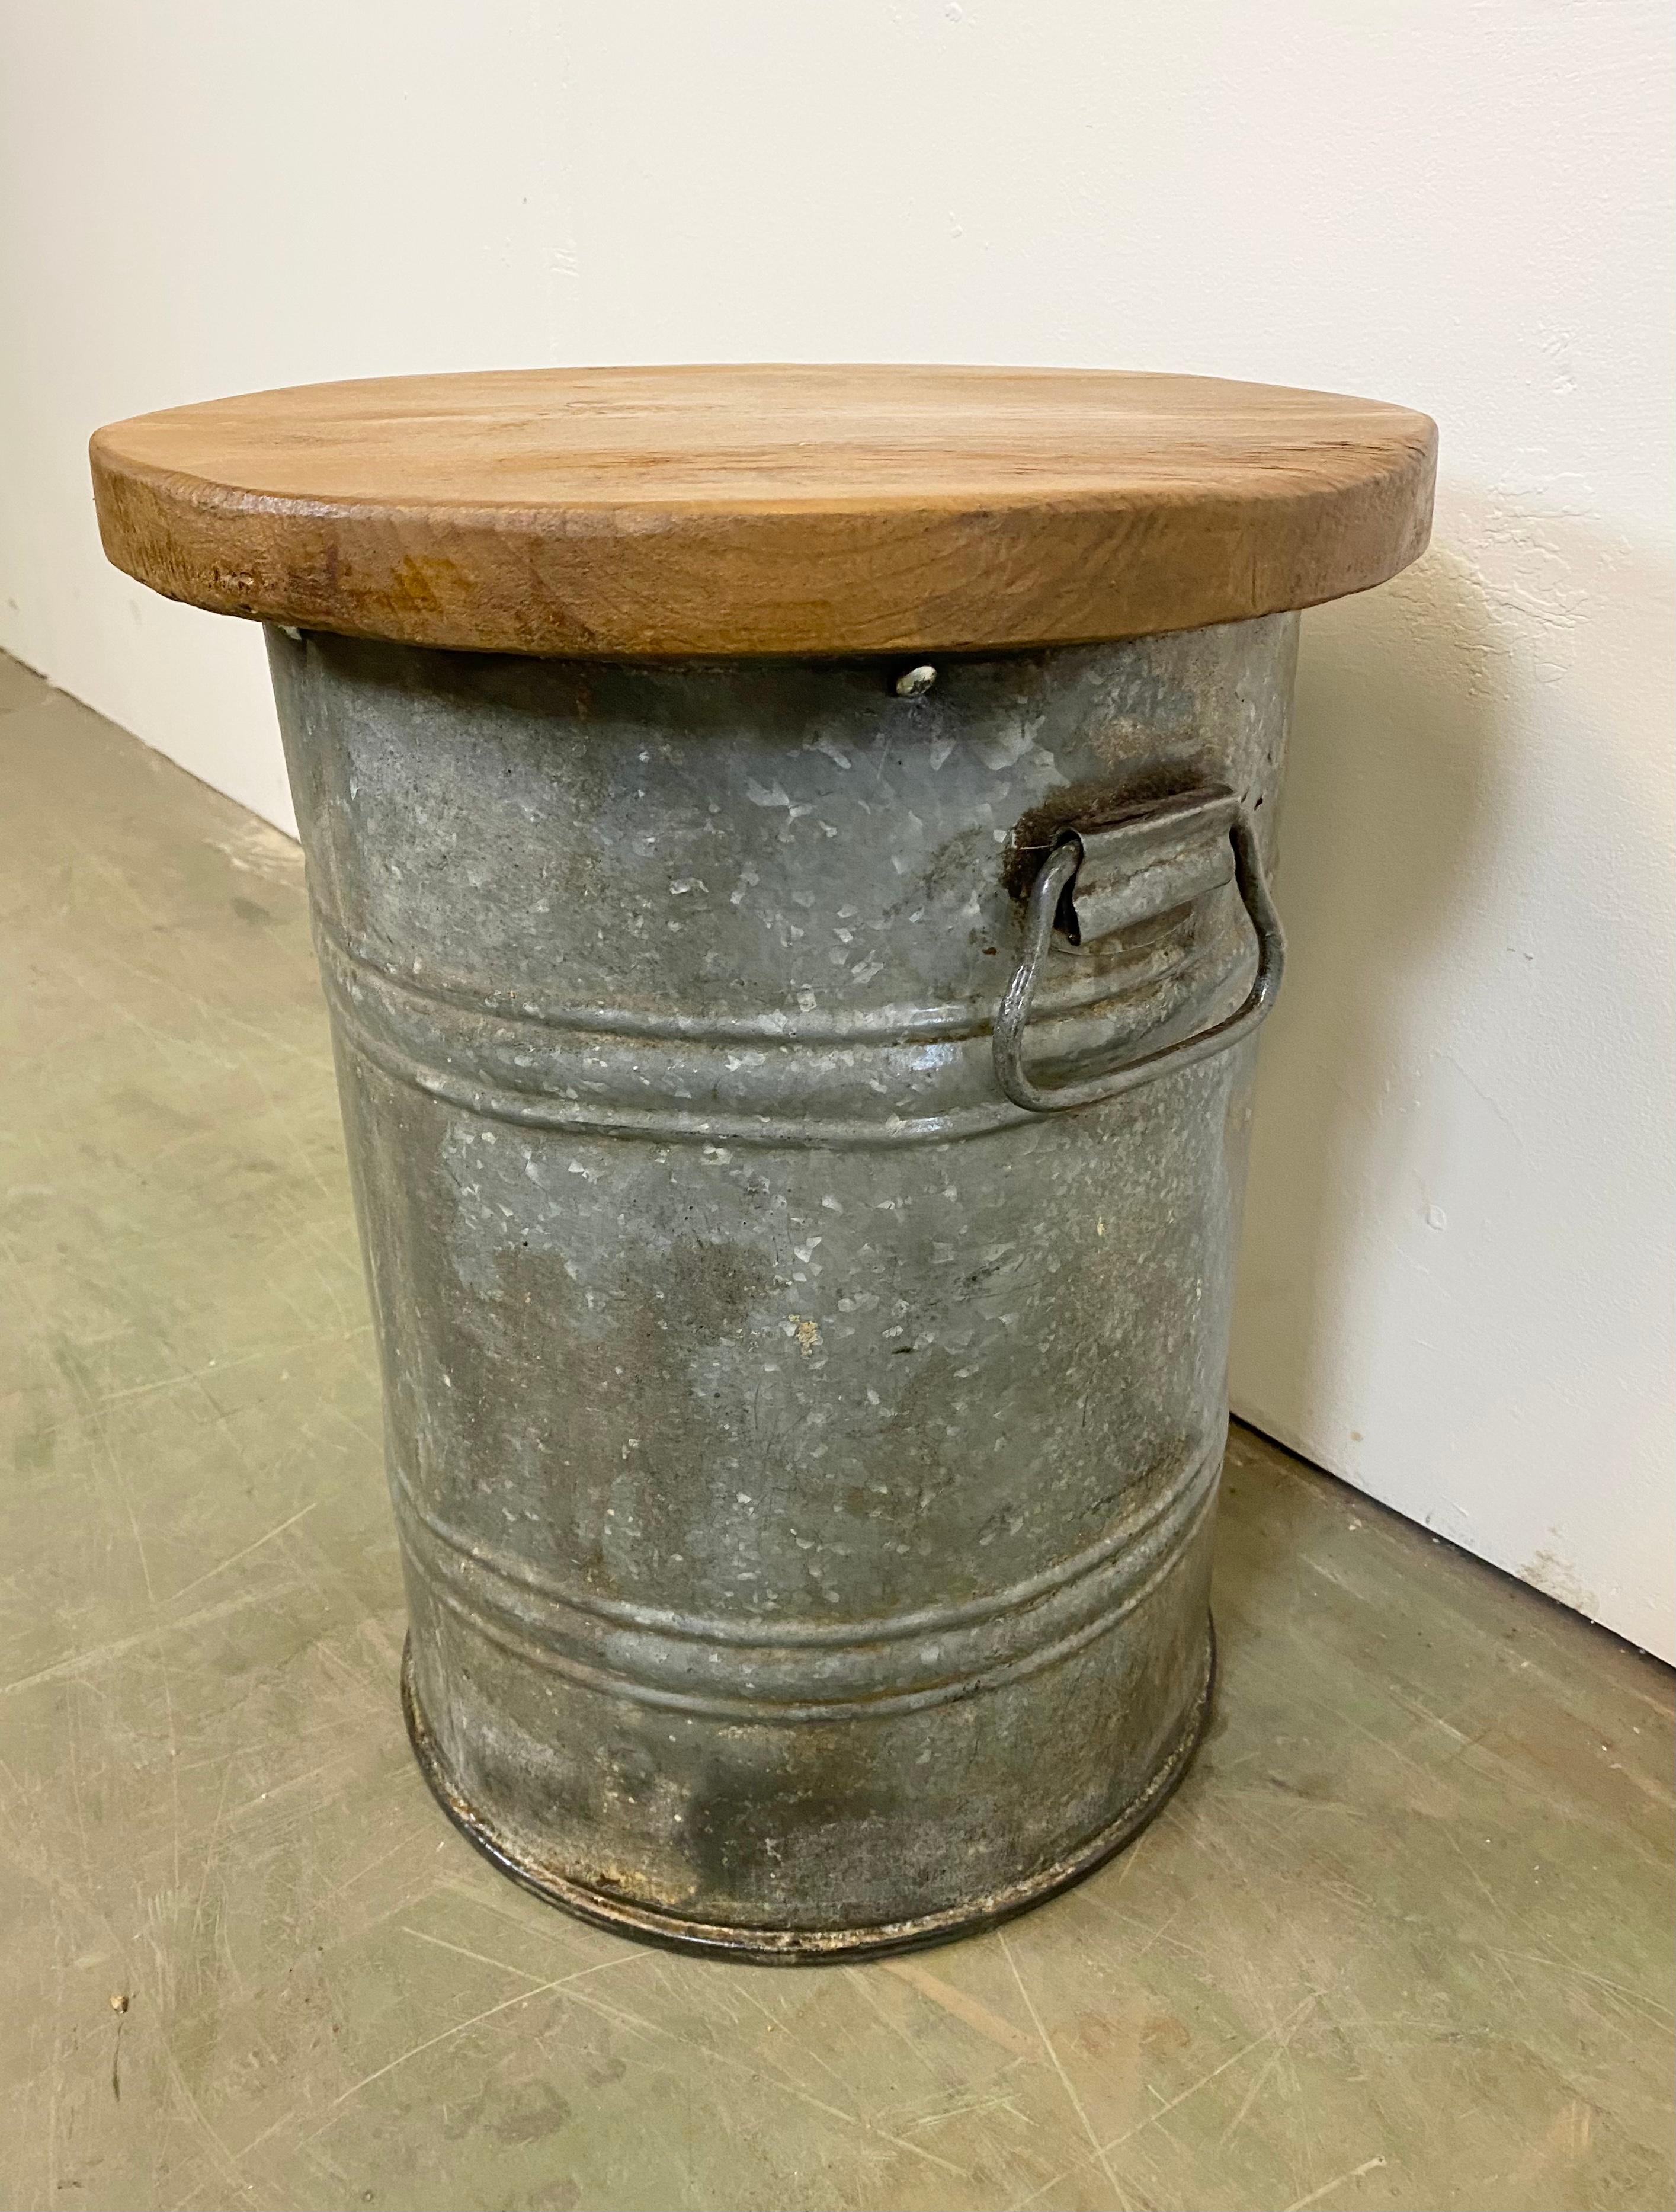 Vintage Industrial stool. It features a grey iron body and a solid wooden seat. The weight of the stool is 7 kg.